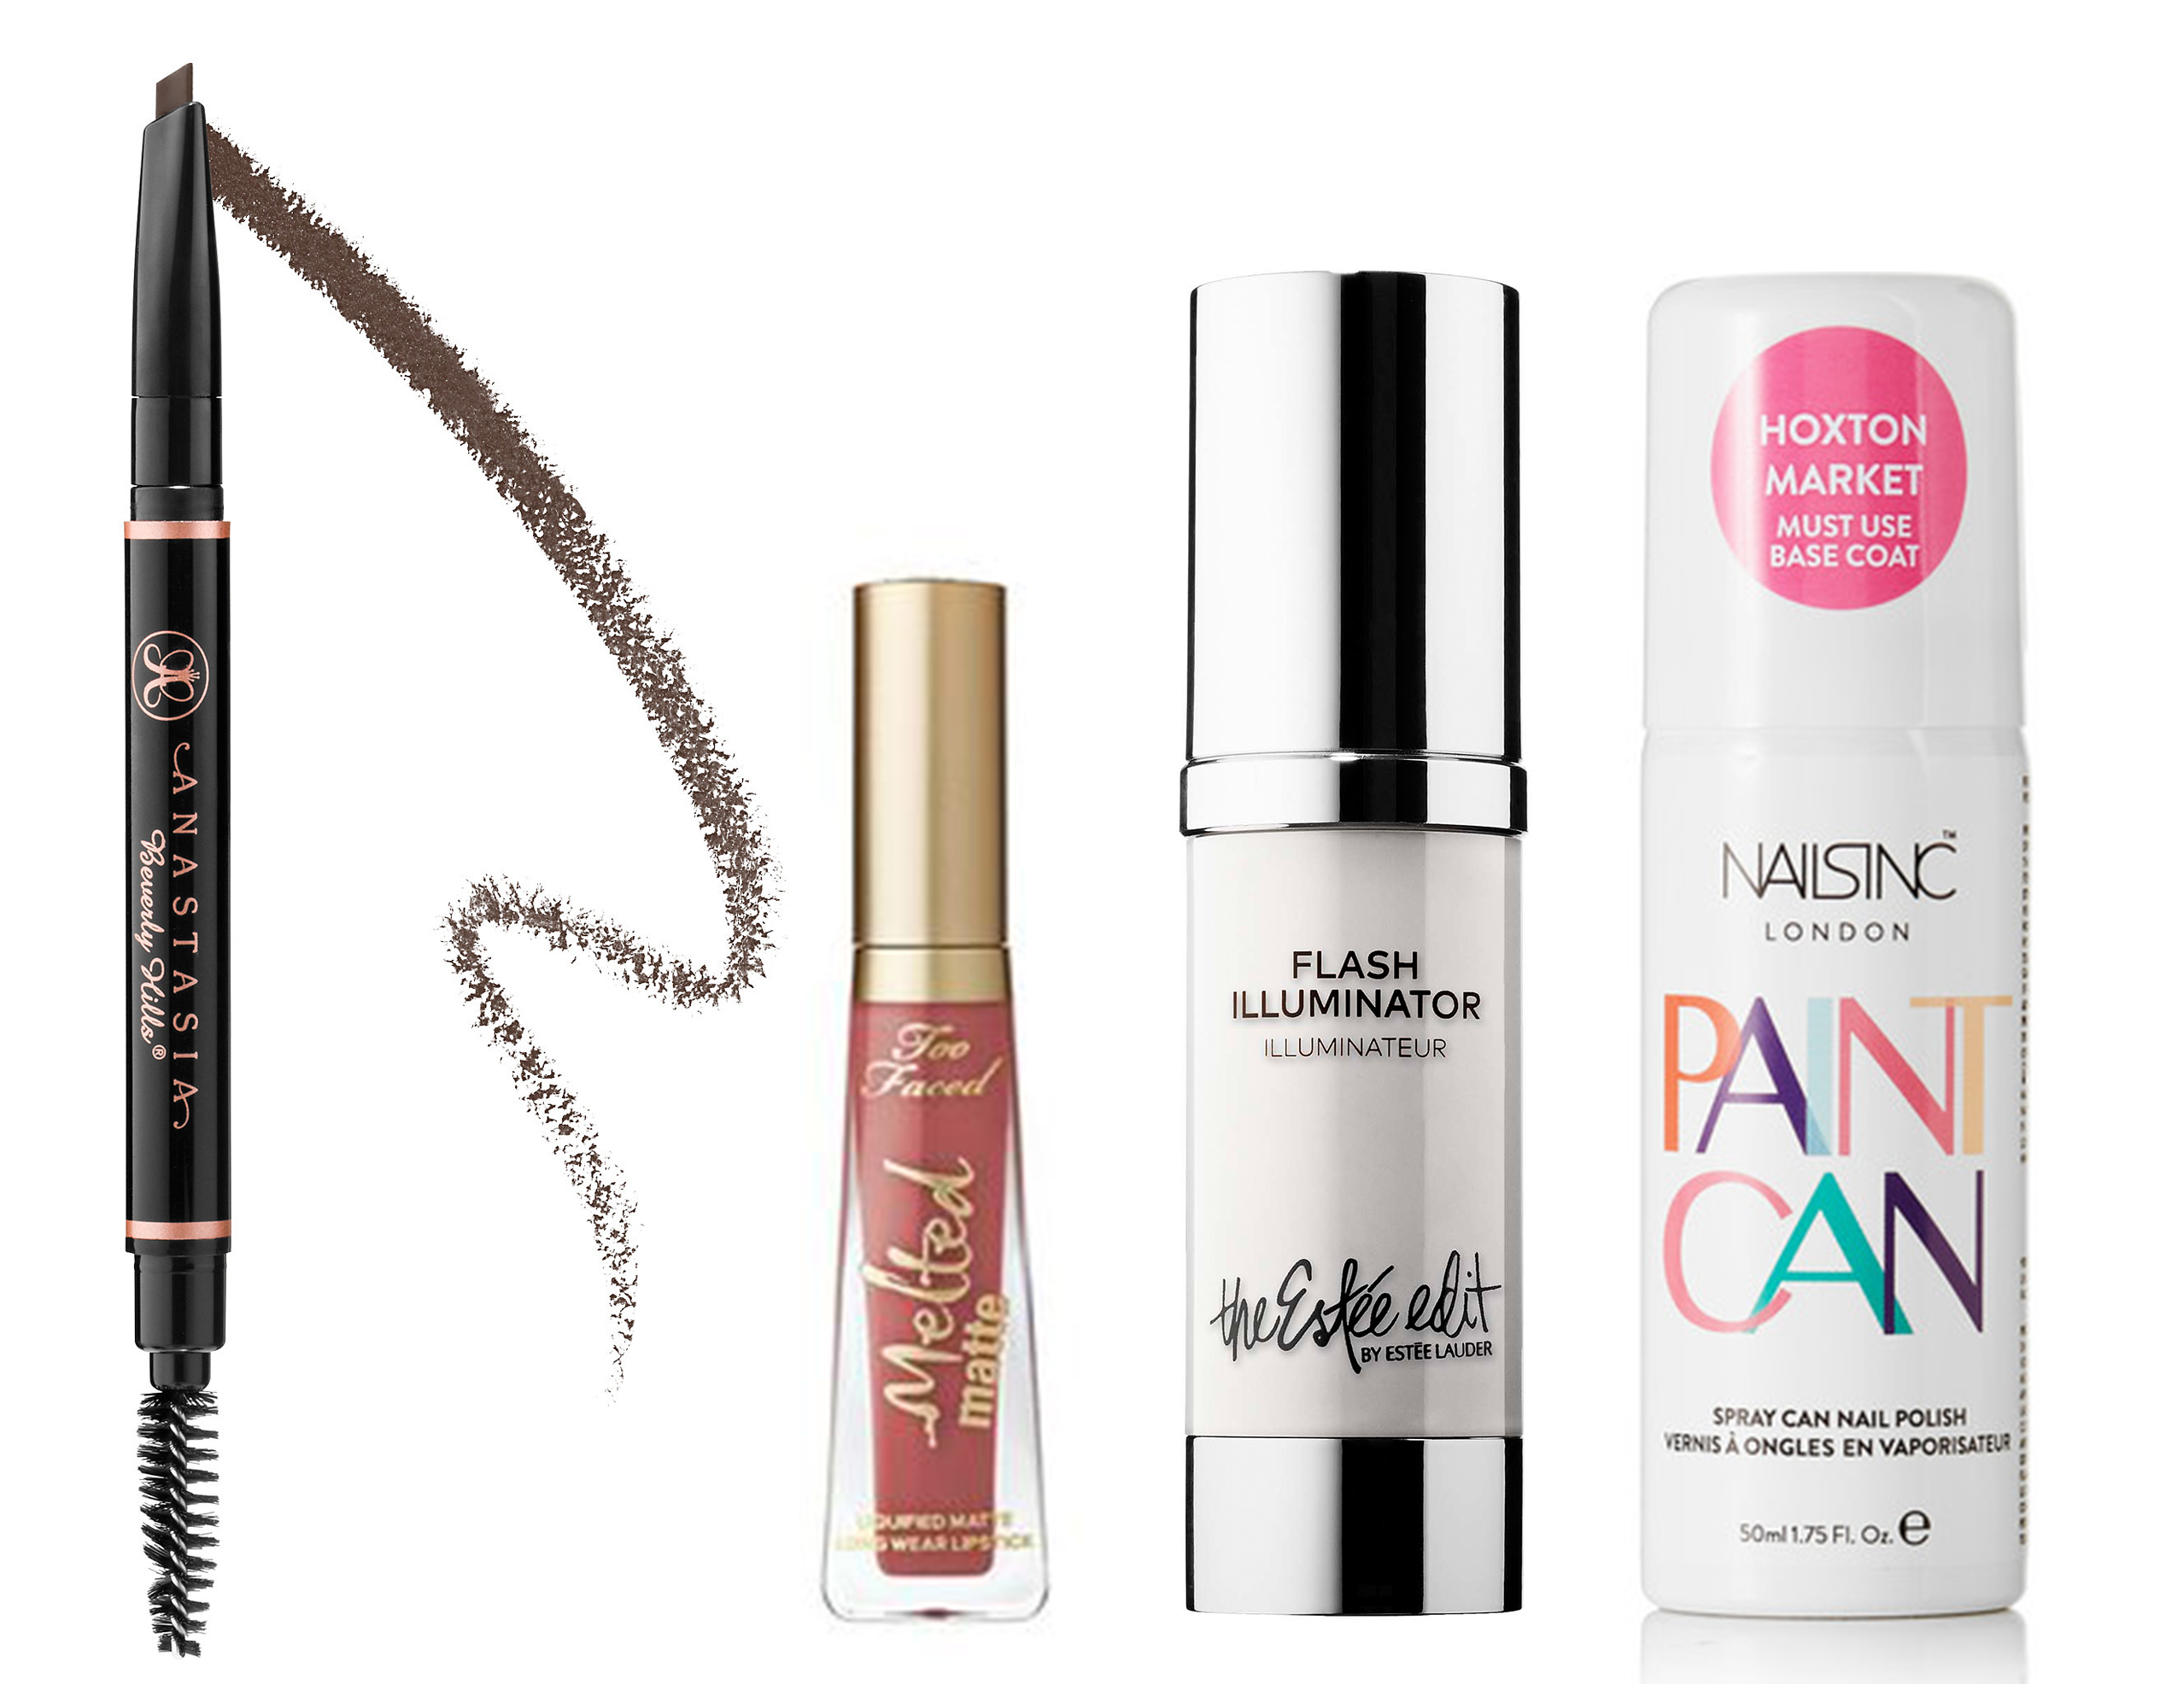 New Makeup Product Launches in 2016